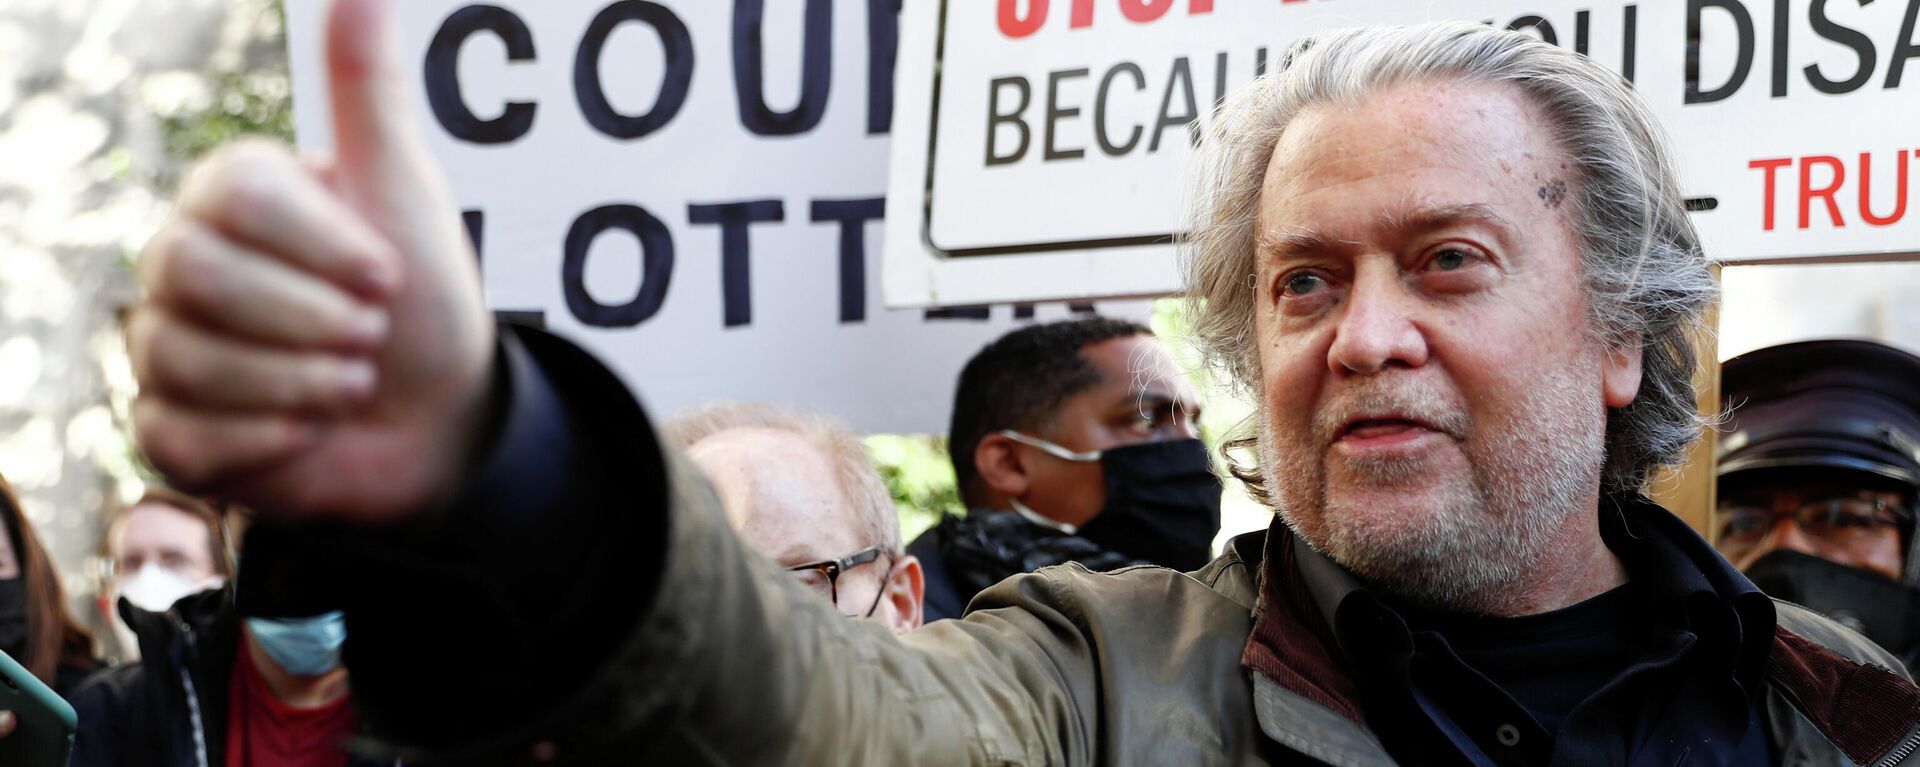 Steve Bannon, talk show host and former White House advisor to former President Donald Trump, leaves an appearance in U.S. District Court after being indicted for refusal to comply with a congressional subpoena over the January 6 attacks on the U.S. Capitol in Washington, U.S., November 15, 2021 - Sputnik International, 1920, 29.11.2021